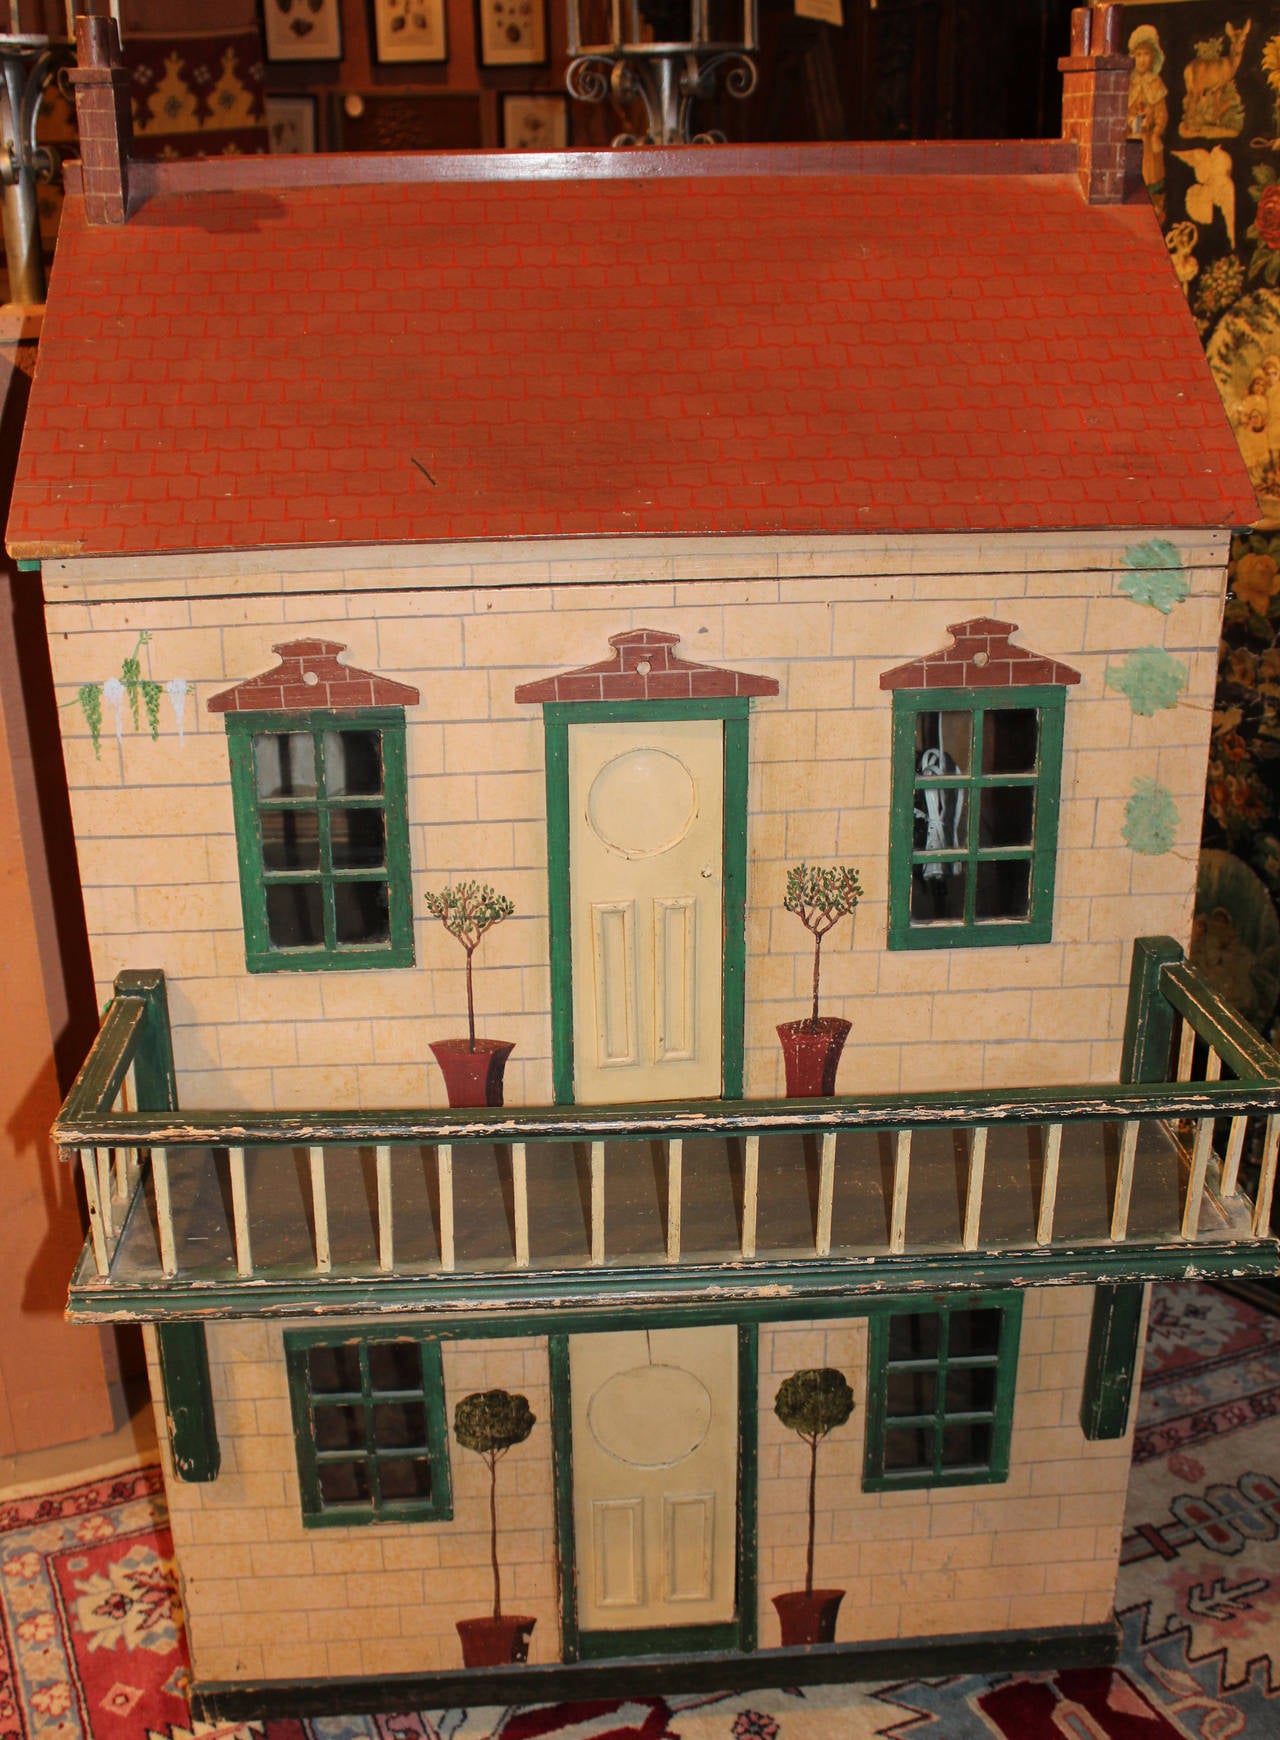 A large handmade and painted wooden two-floor doll house, probably early 20th century English,  with veranda on the top floor, and hinged front which opens to expose the two interior rooms. Traces of the original wallpaper remain on the walls, with